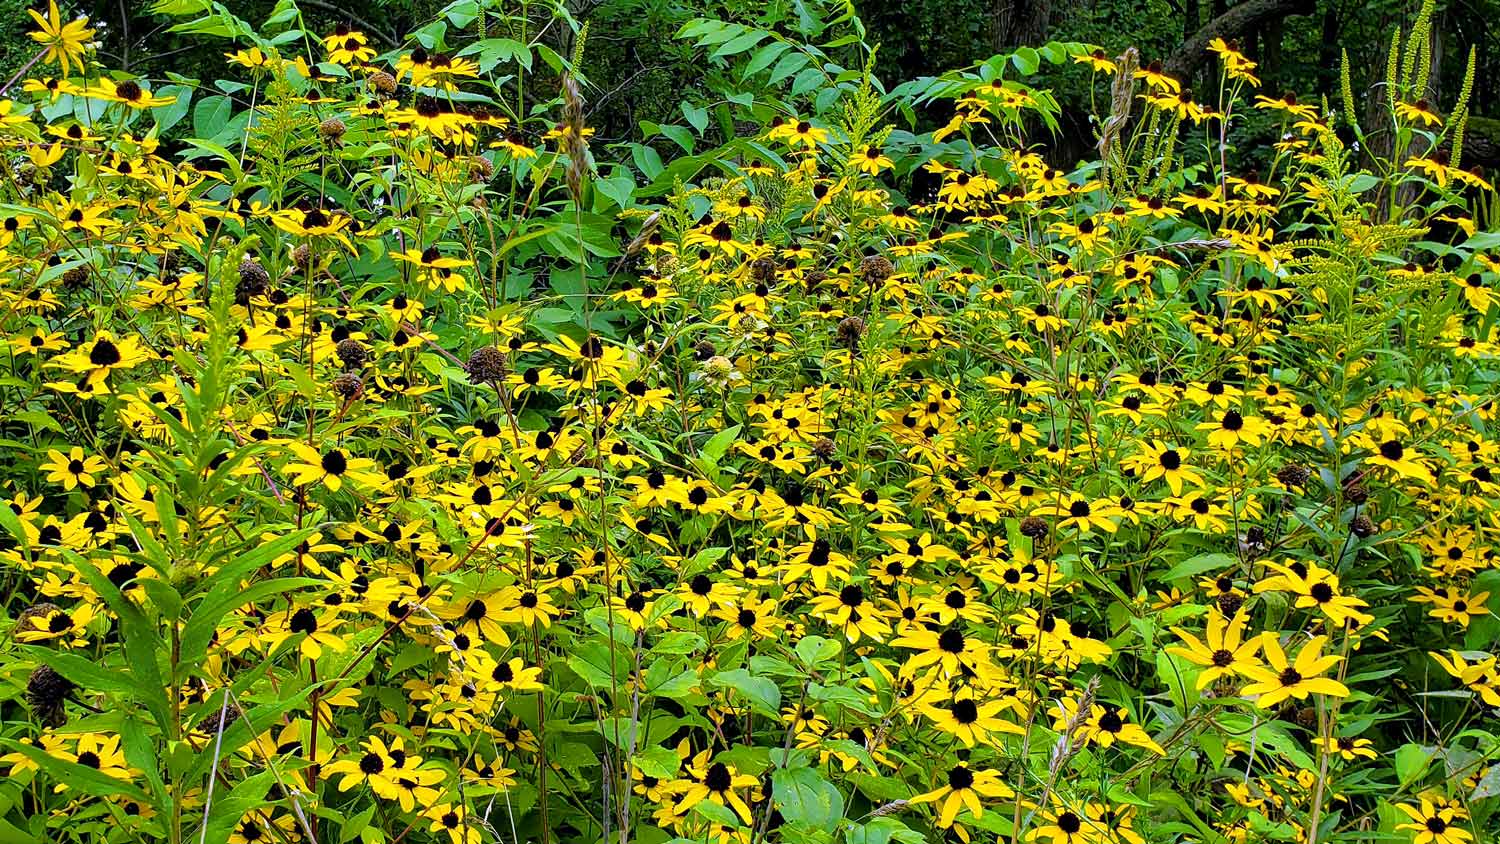 Sea of Black-Eyed Susans at the Pleasant Valley Conservation Area.